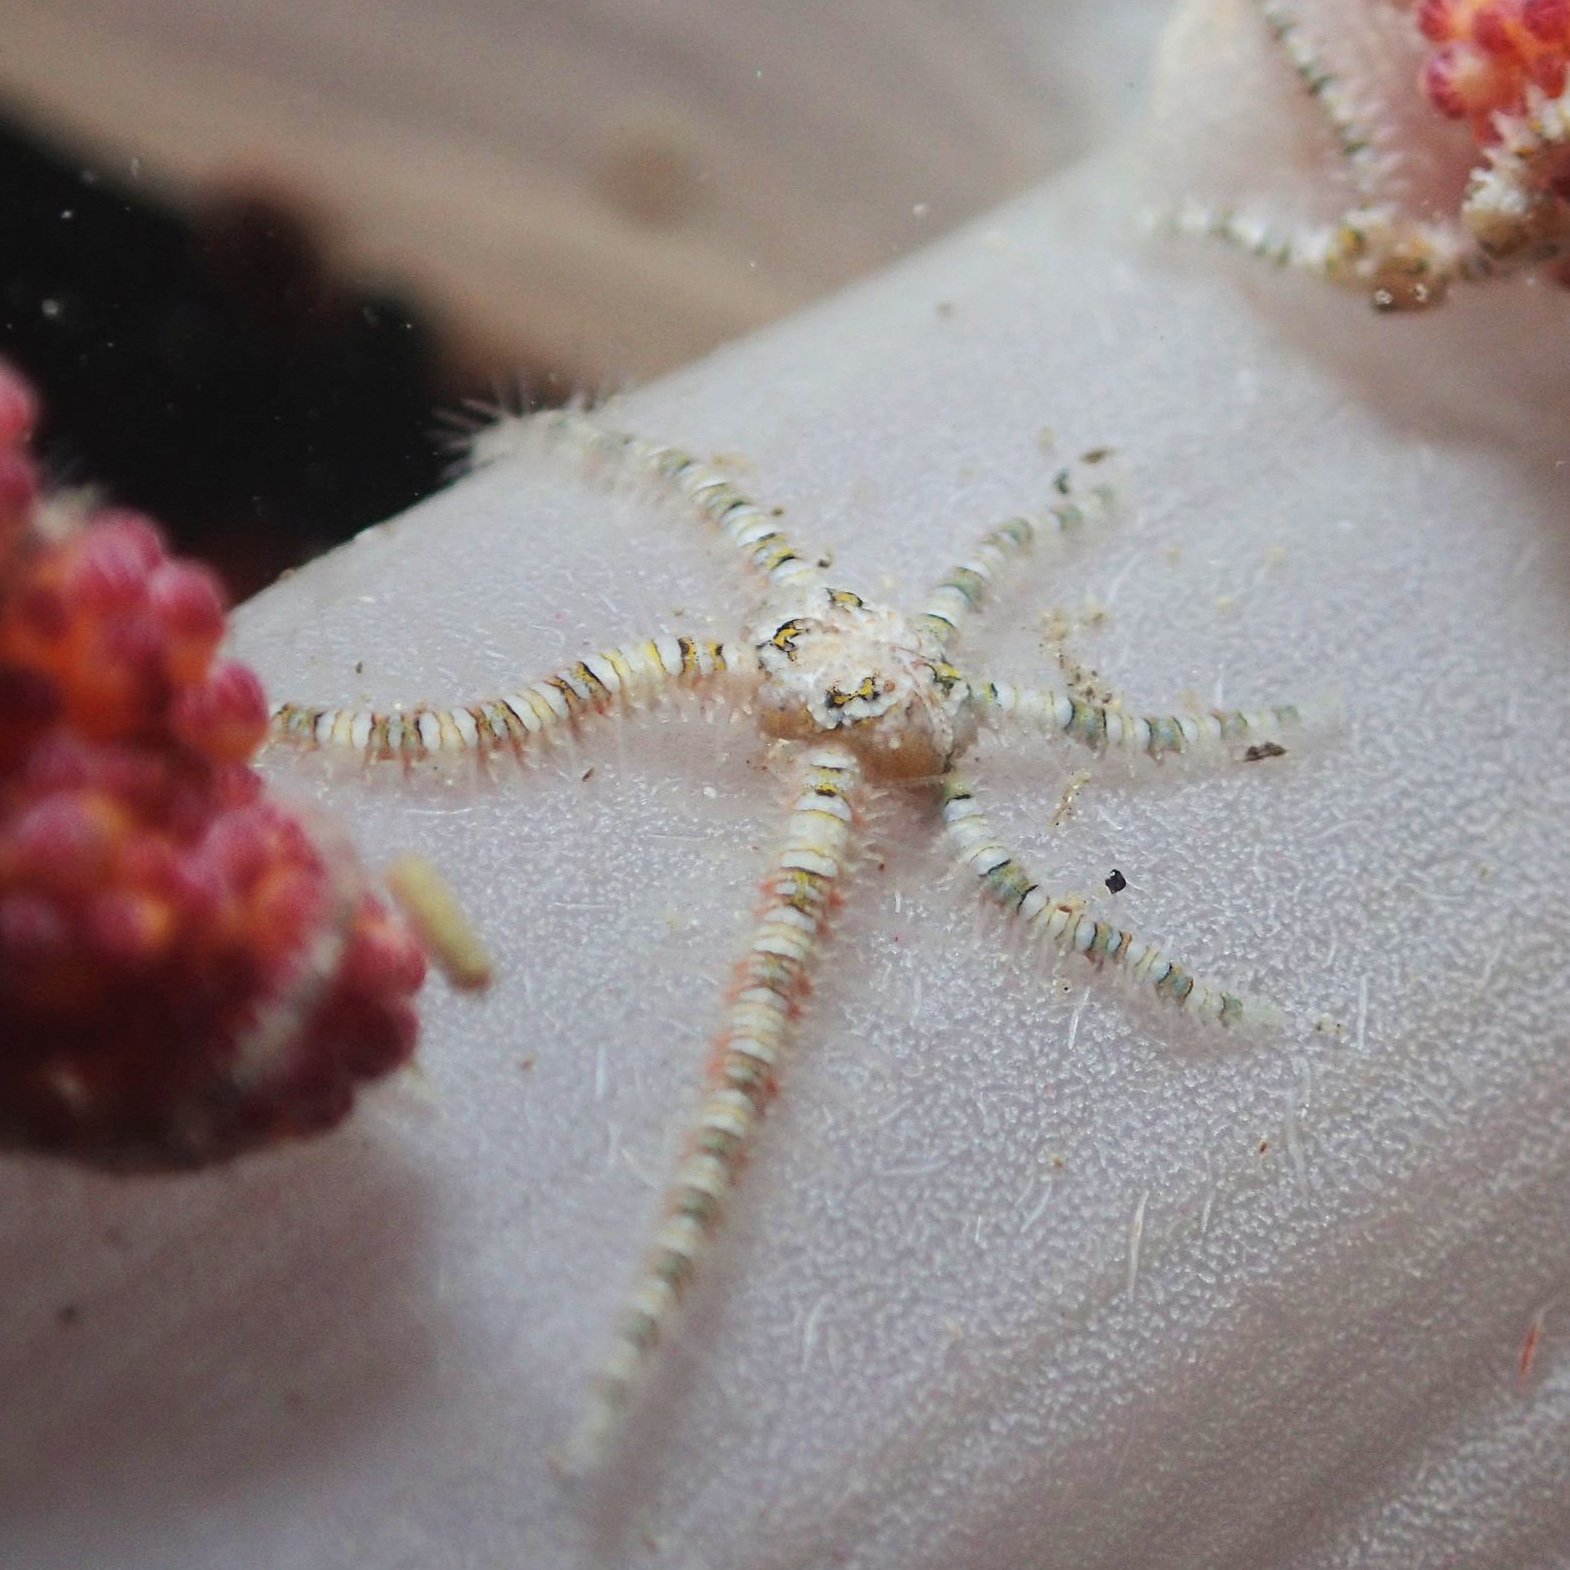 OPHIUROIDS (BRITTLE STARS)